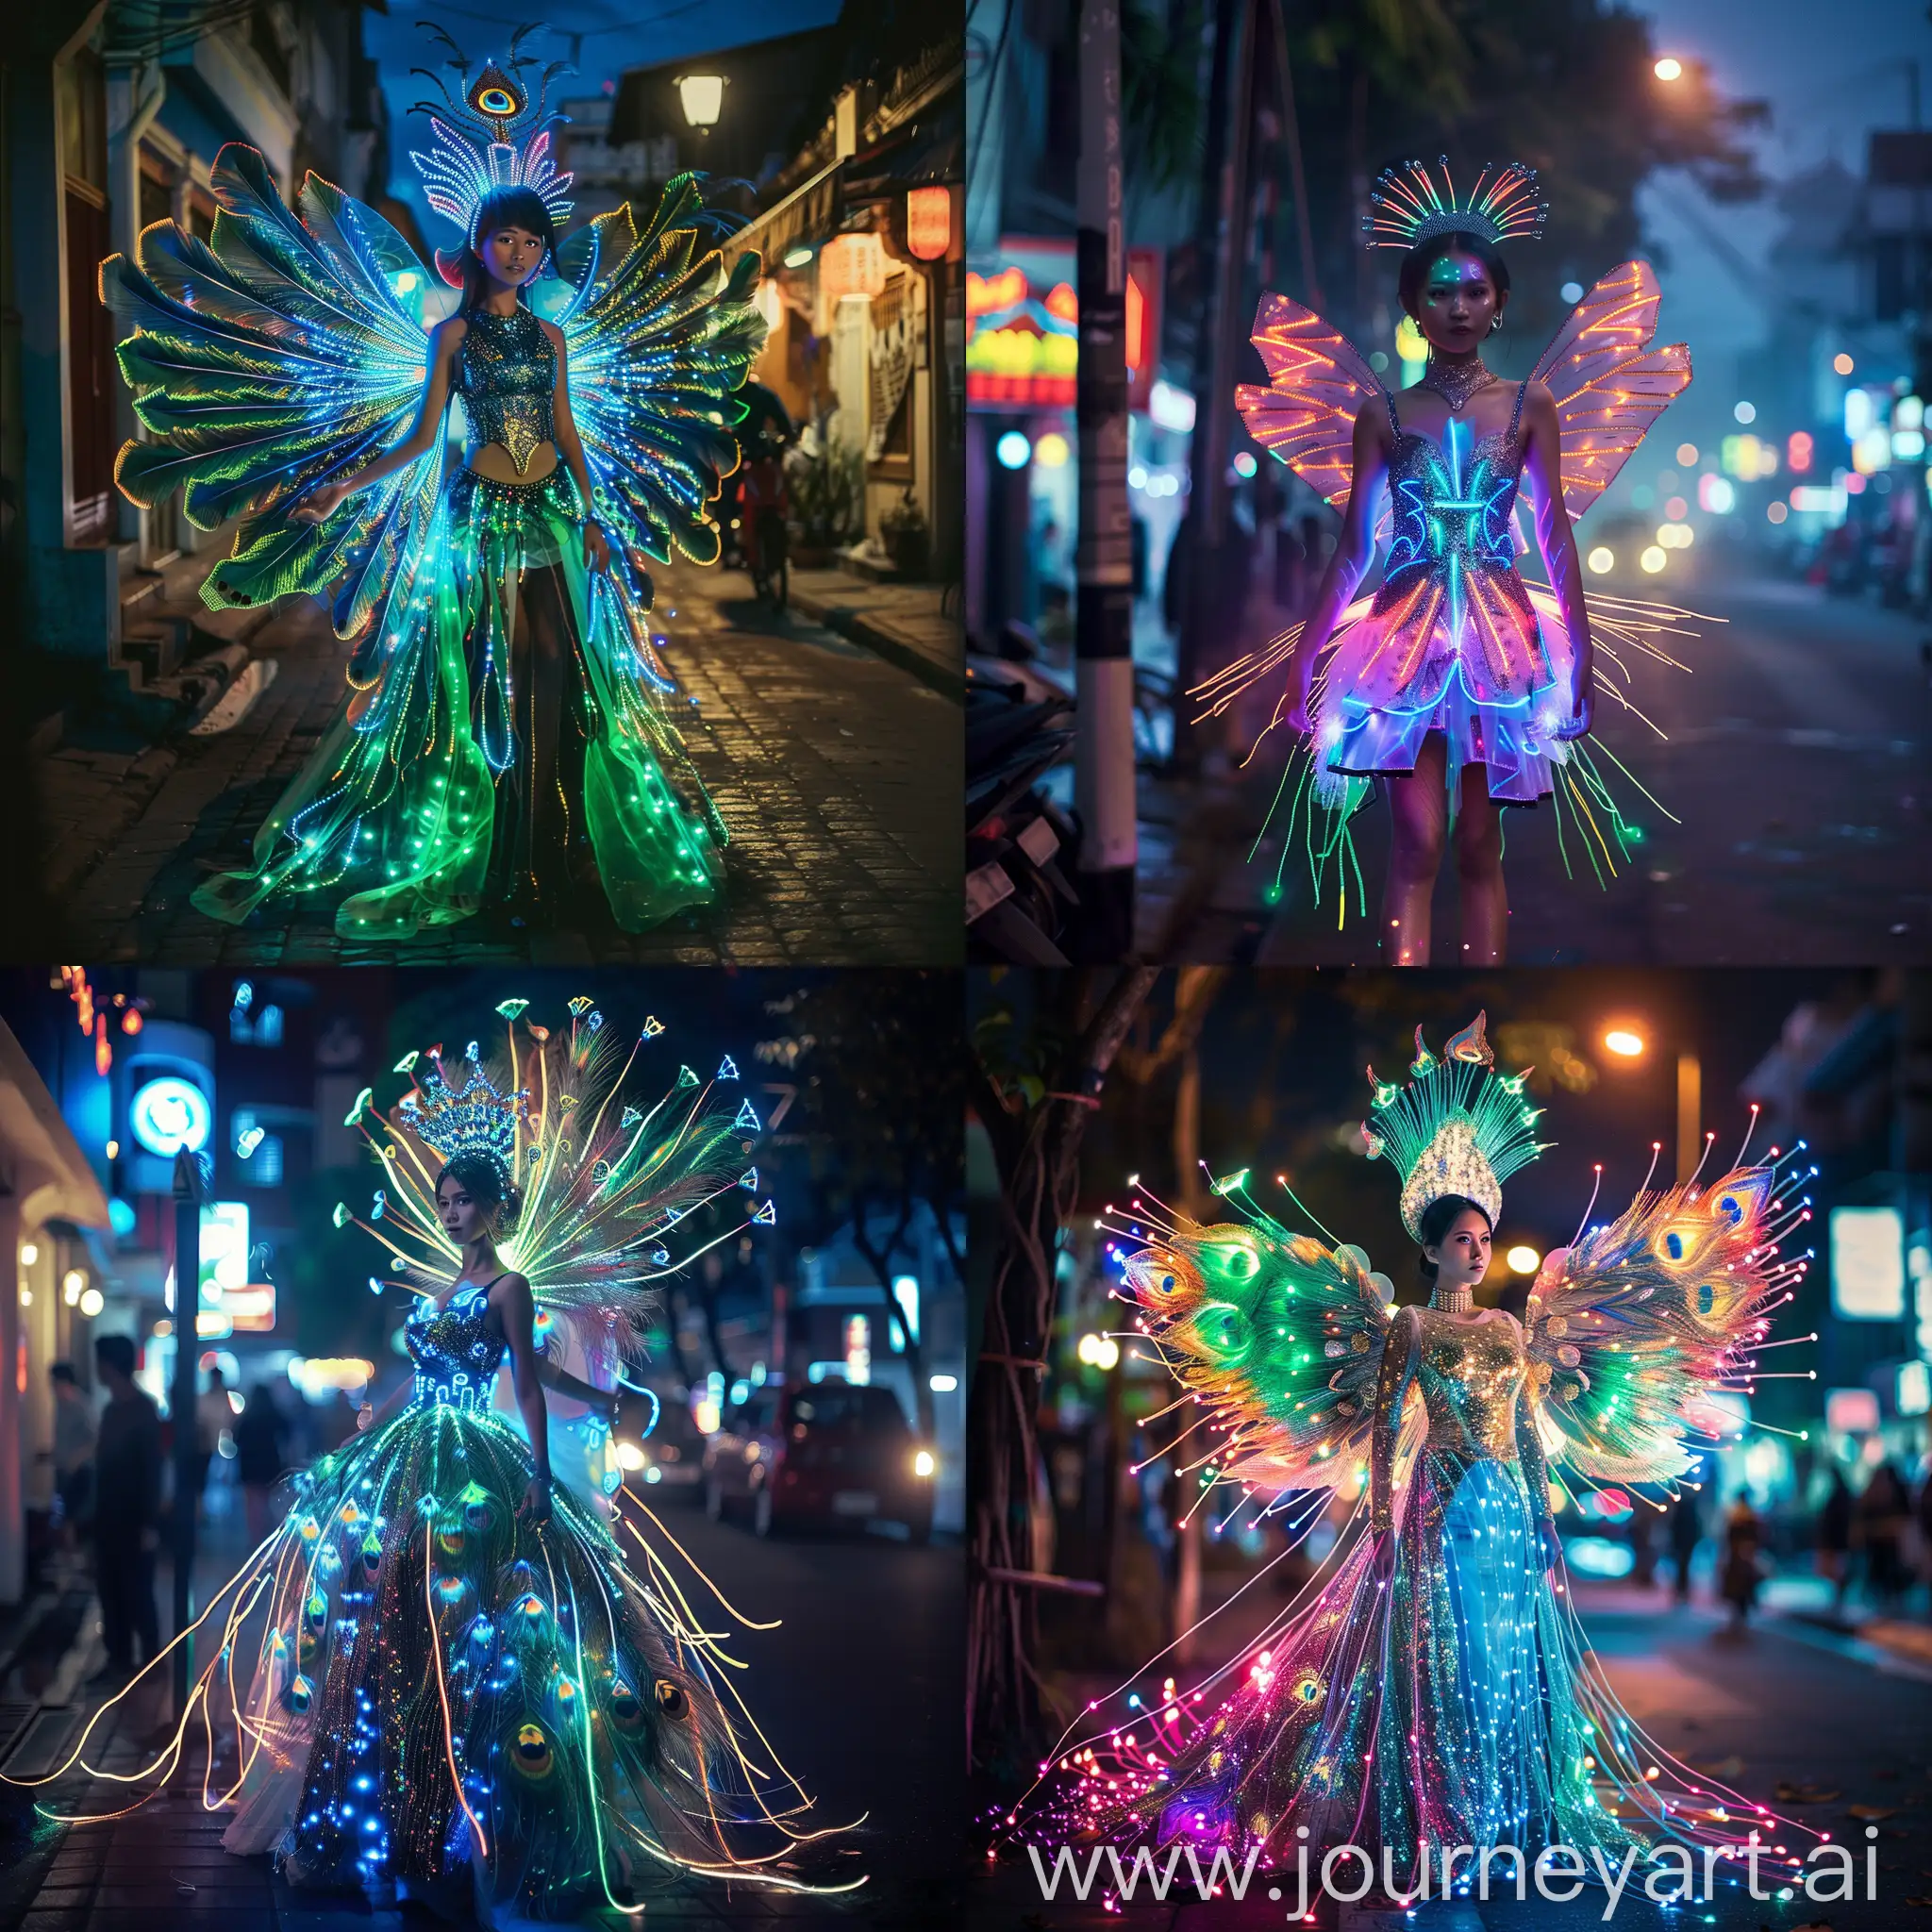 Futuristic-Indonesian-Woman-in-Neon-Lights-Dress-and-Peacock-Feather-Holographic-Wings